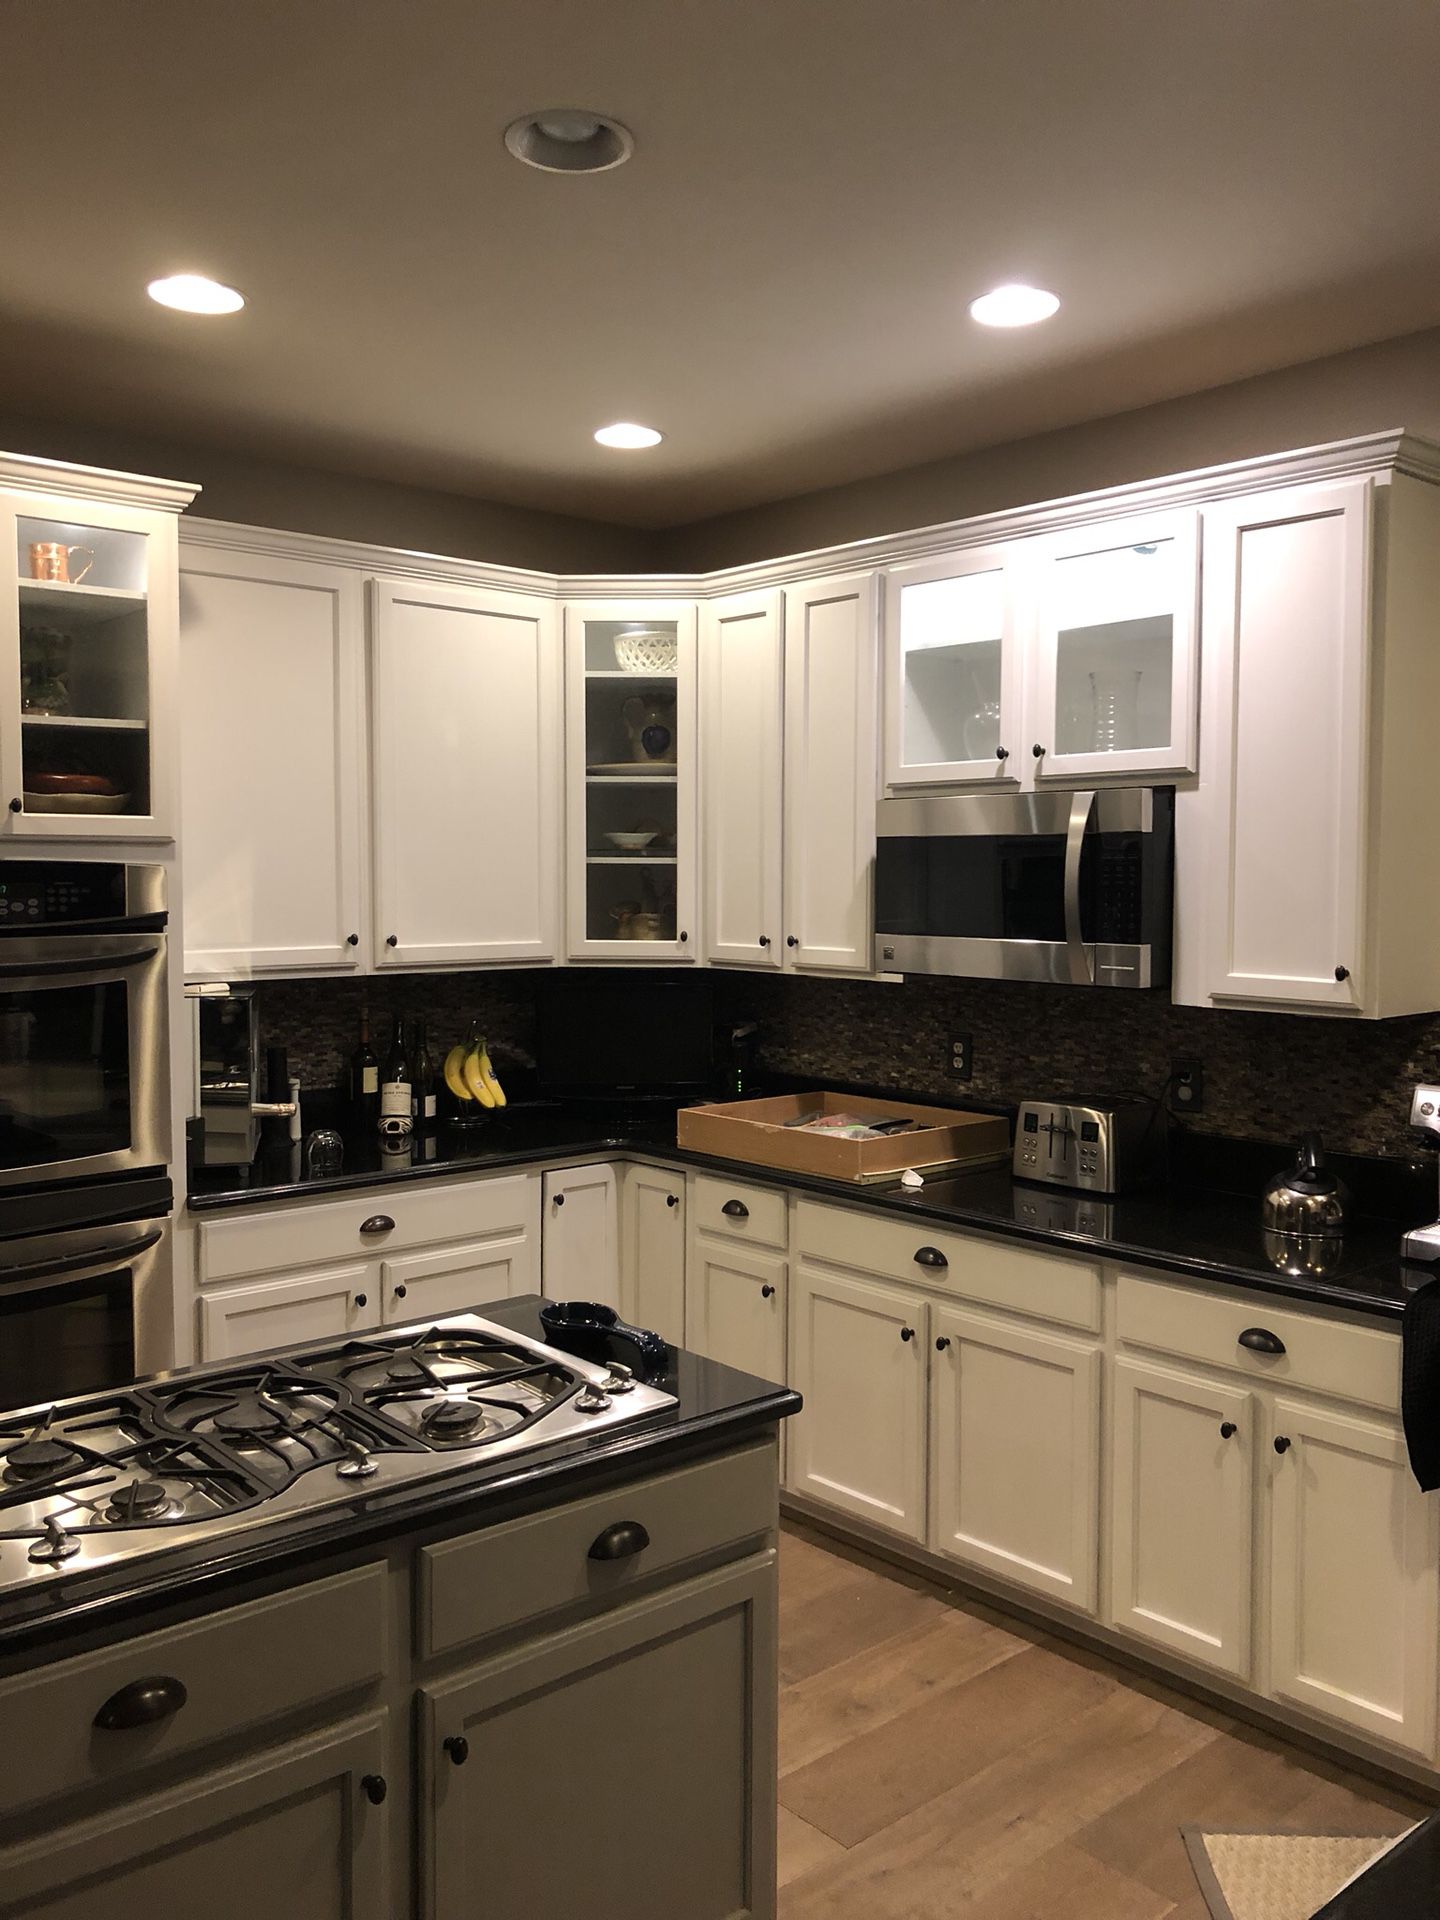 Kitchen doors, drawer fronts and black granite for sale!